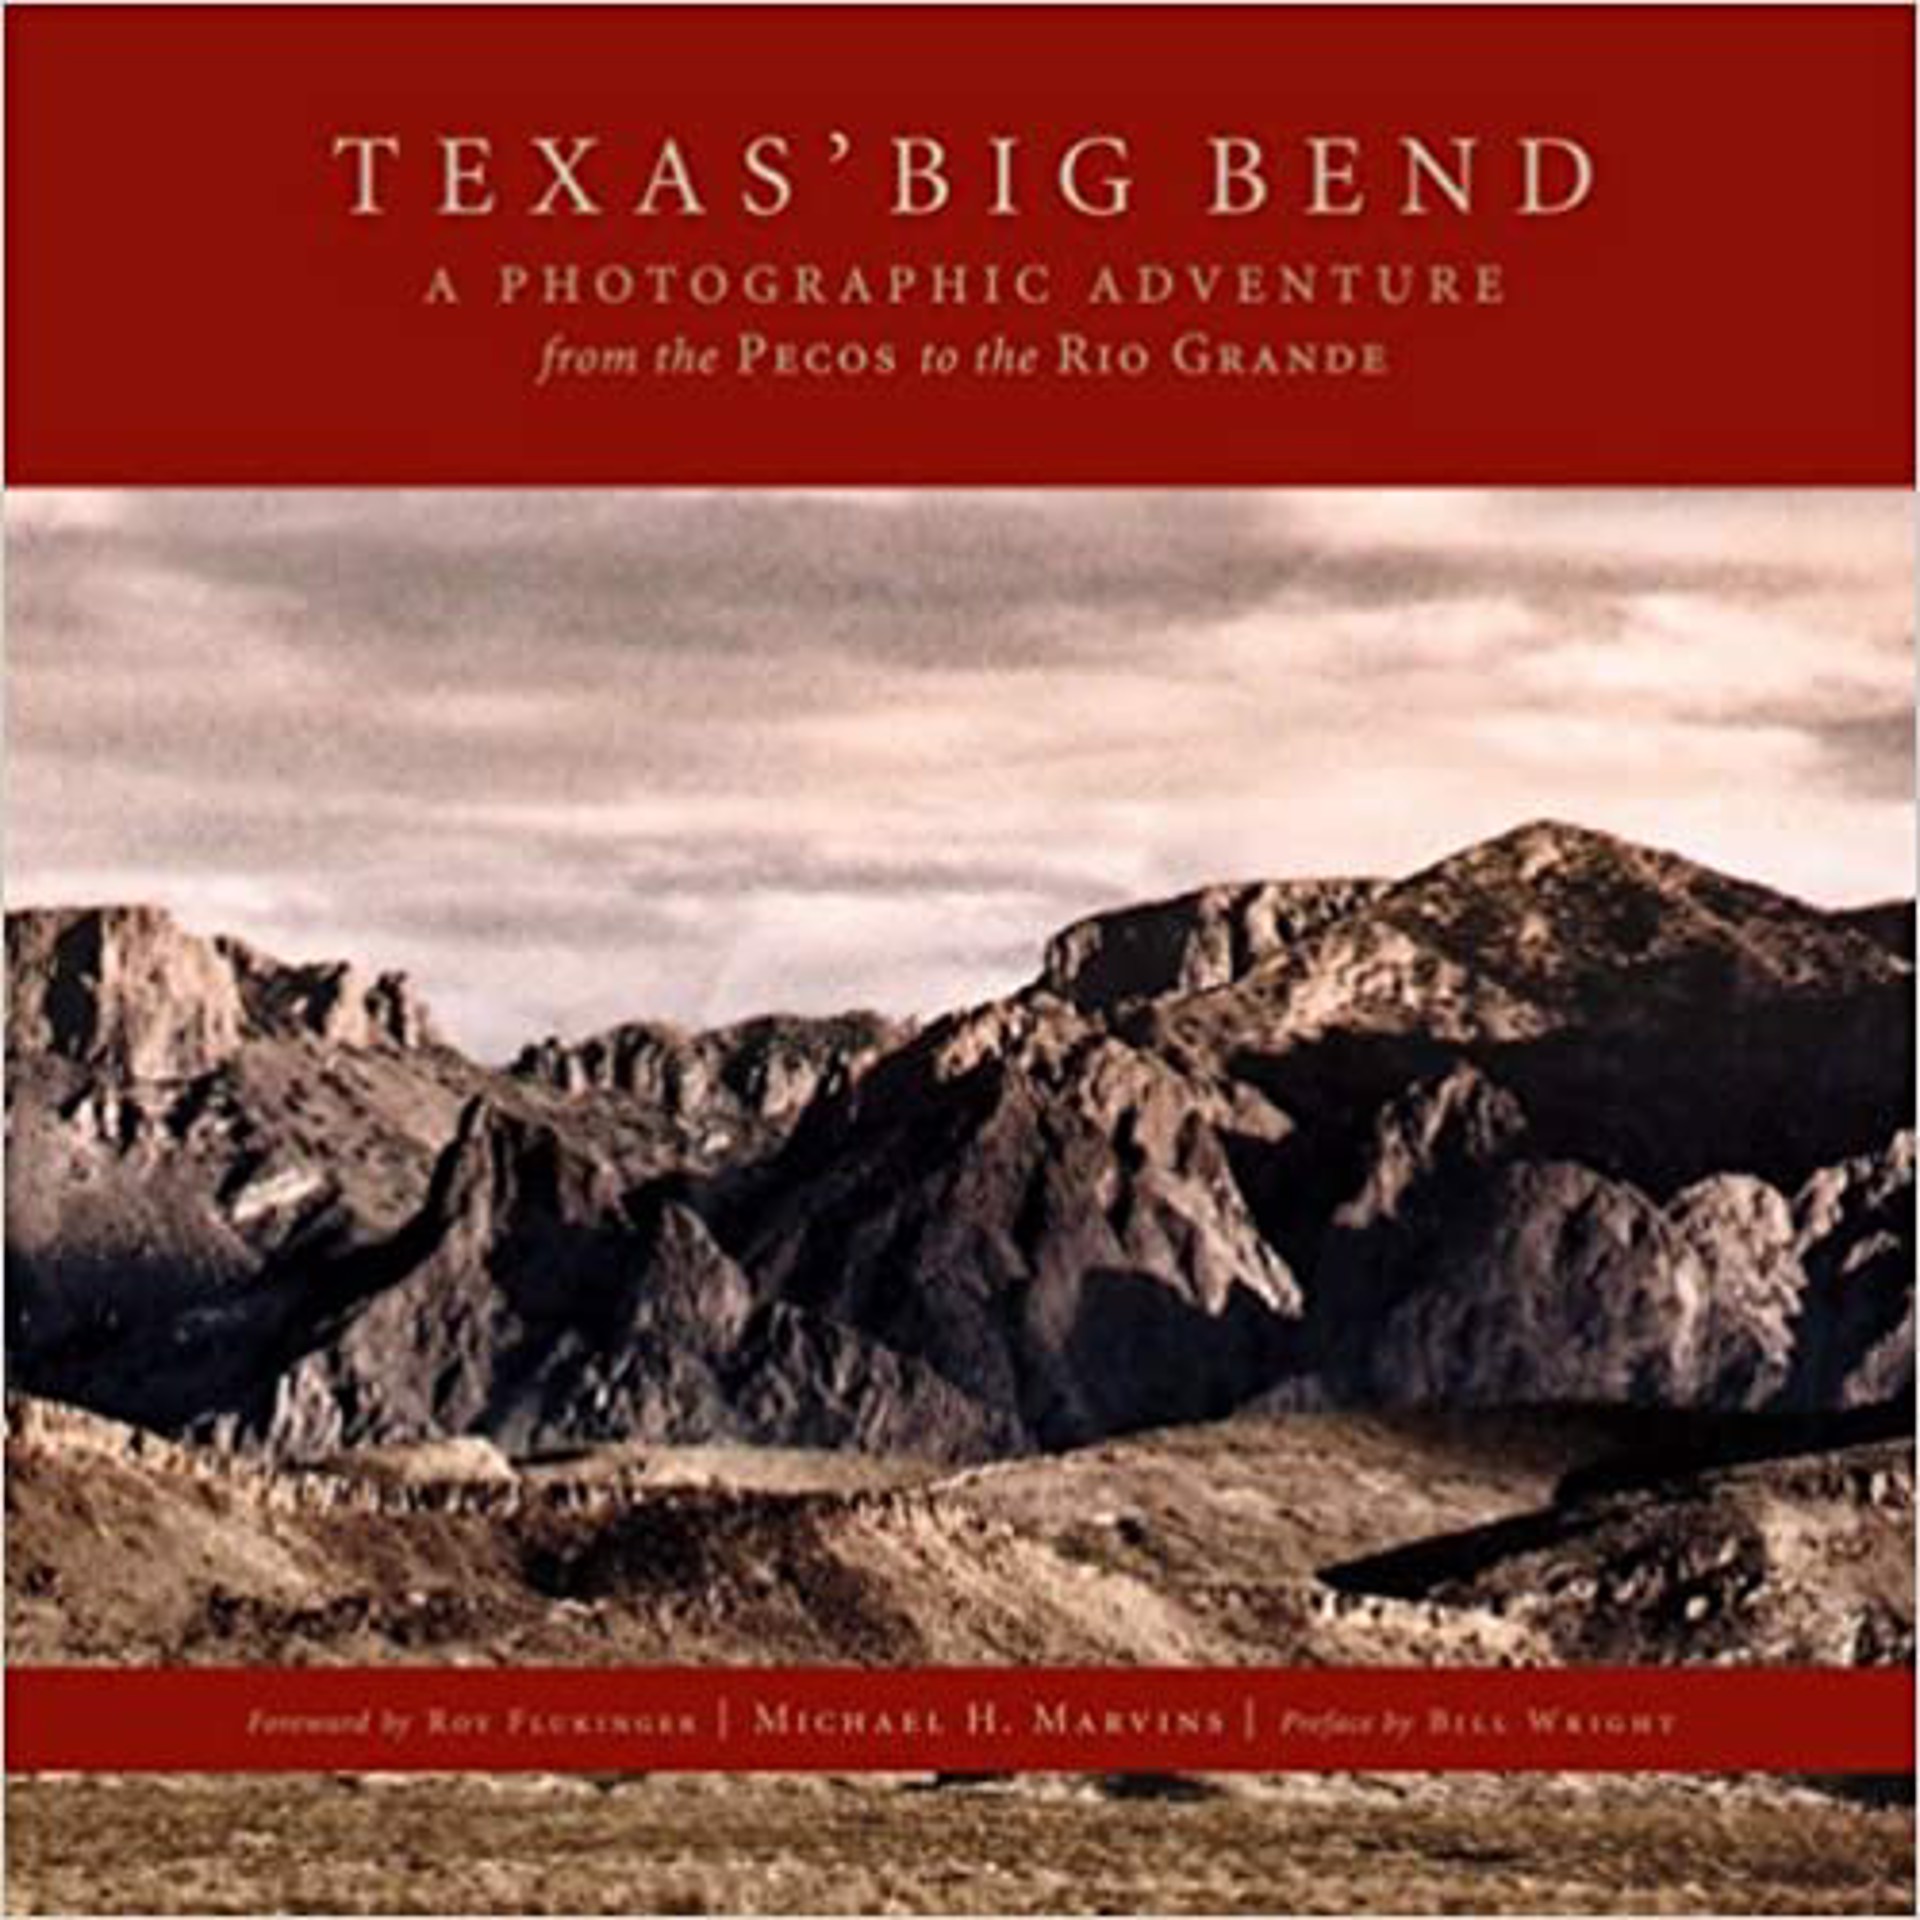 Texas' Big Bend: A Photographic Adventure from the Pecos to the Rio Grande by Michael H, Marvins by Publications